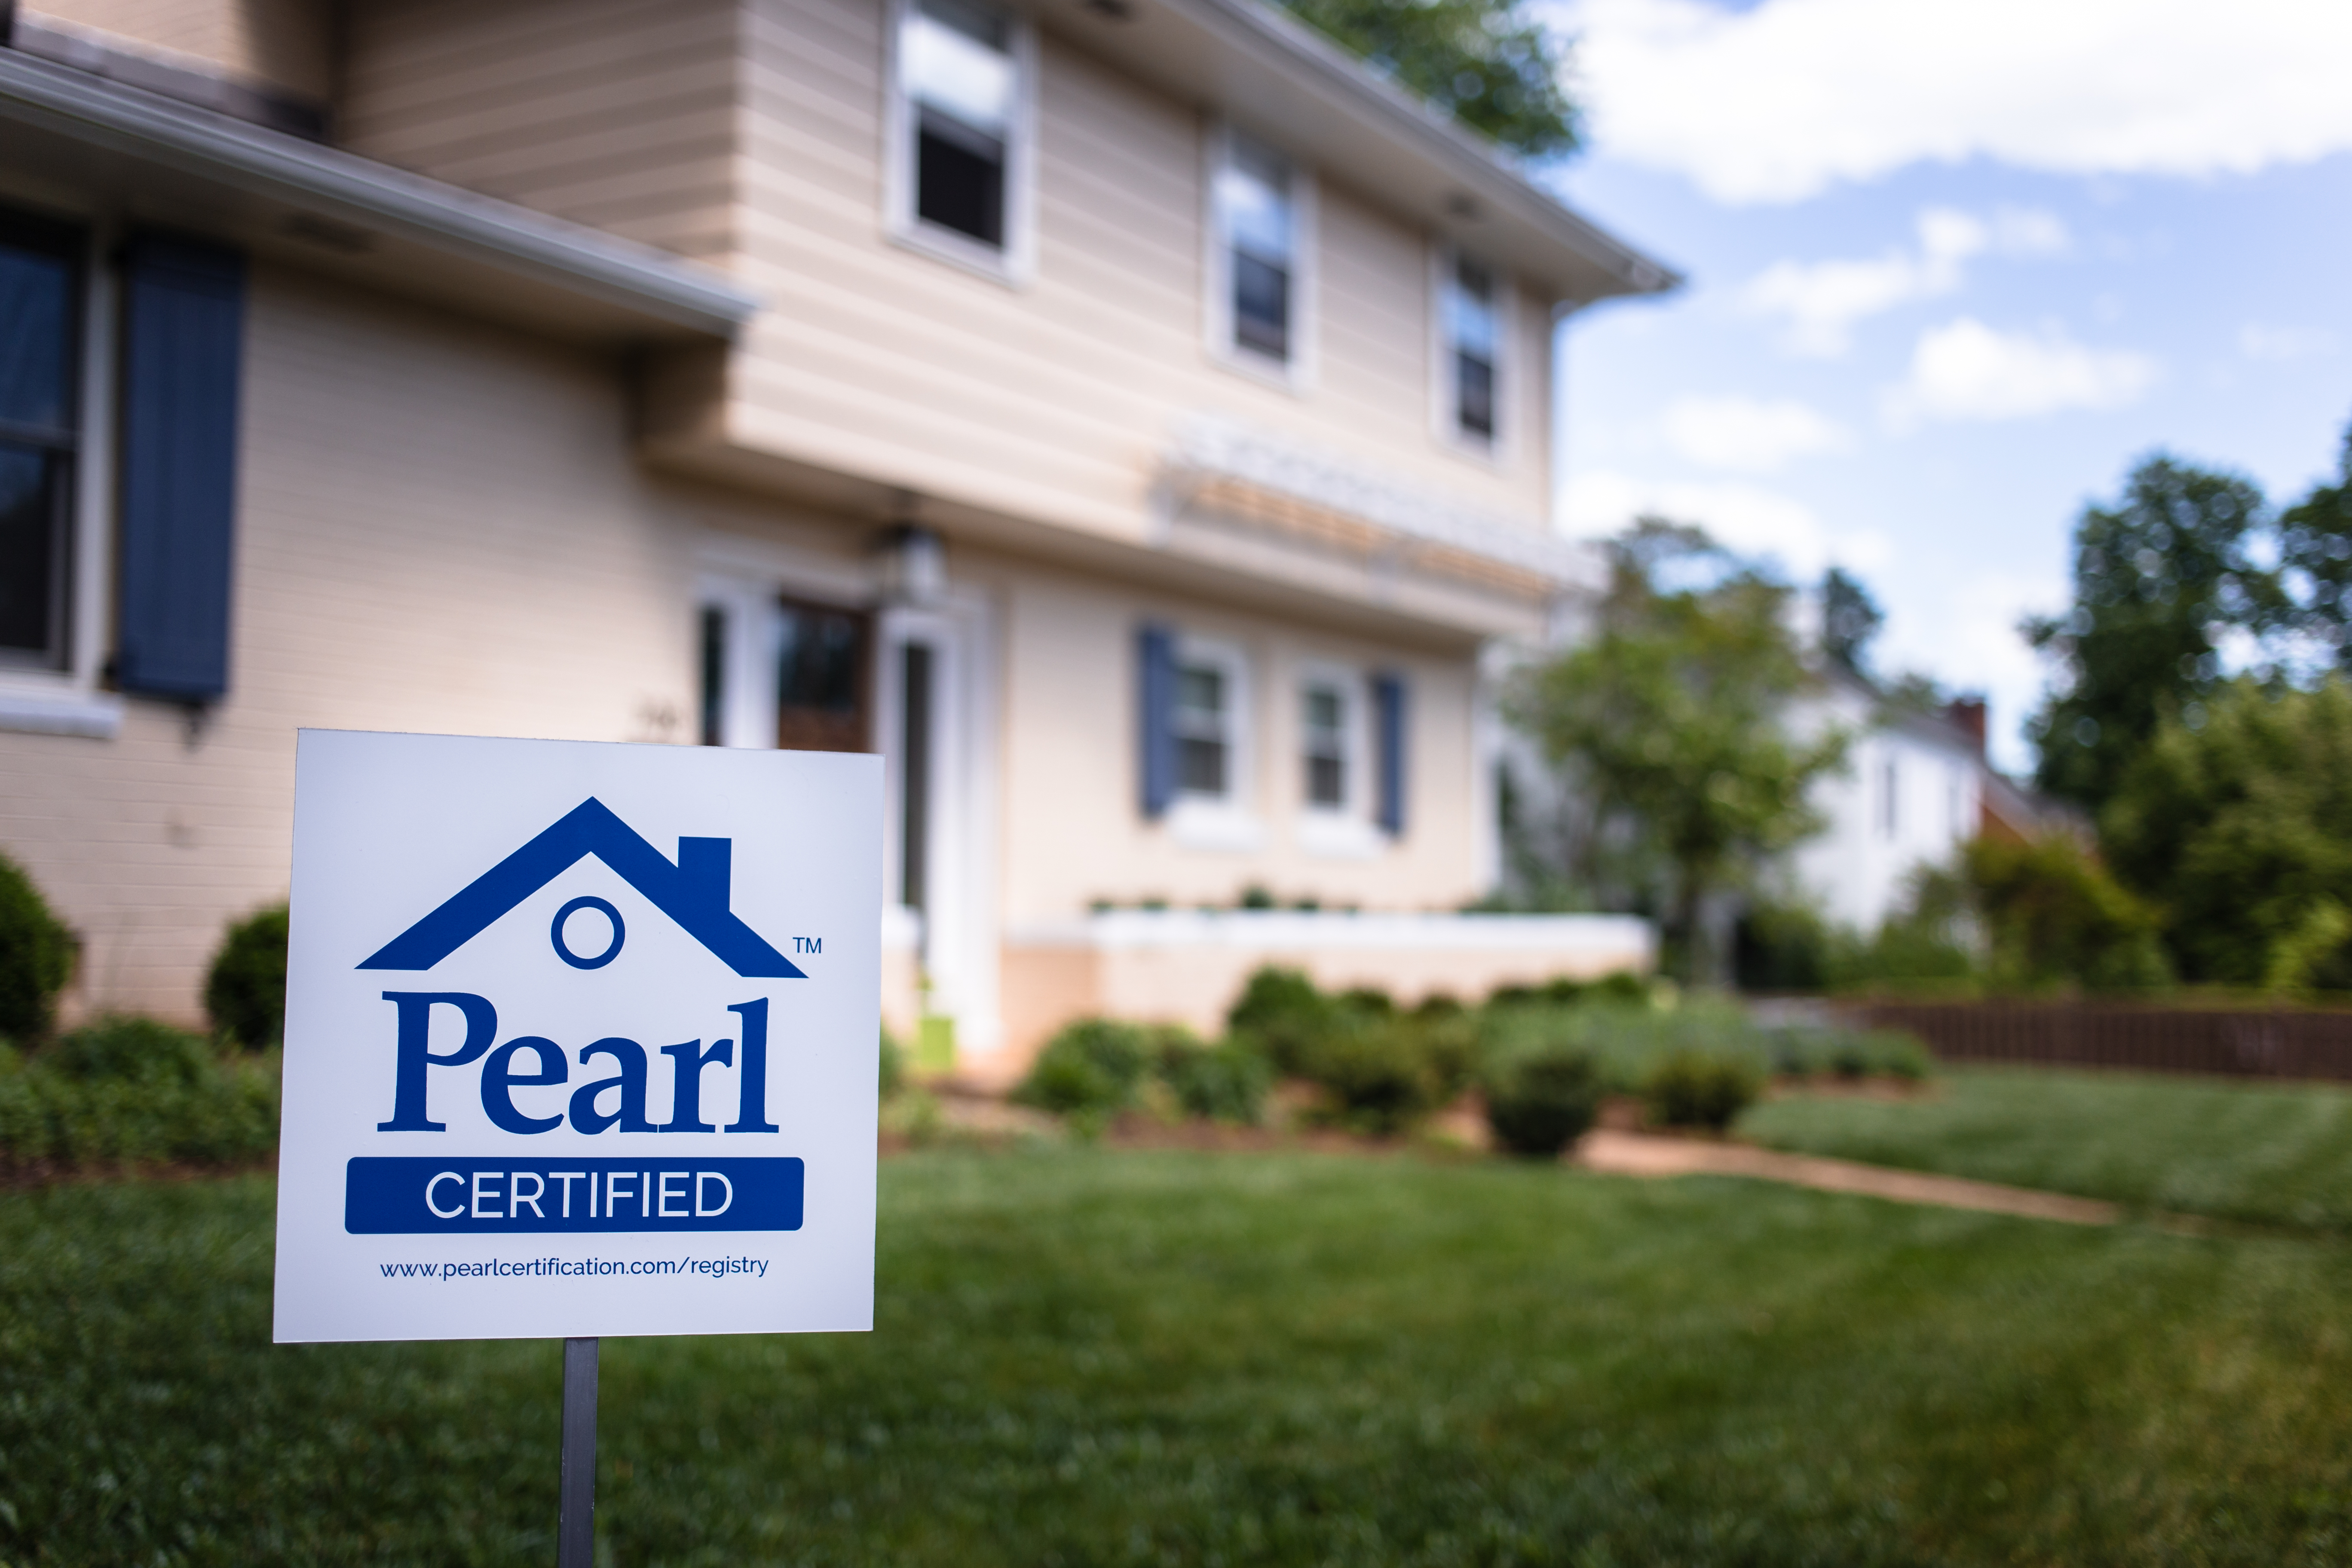 Phoenix Pearl Certification – A New Way To Market Solar Homes